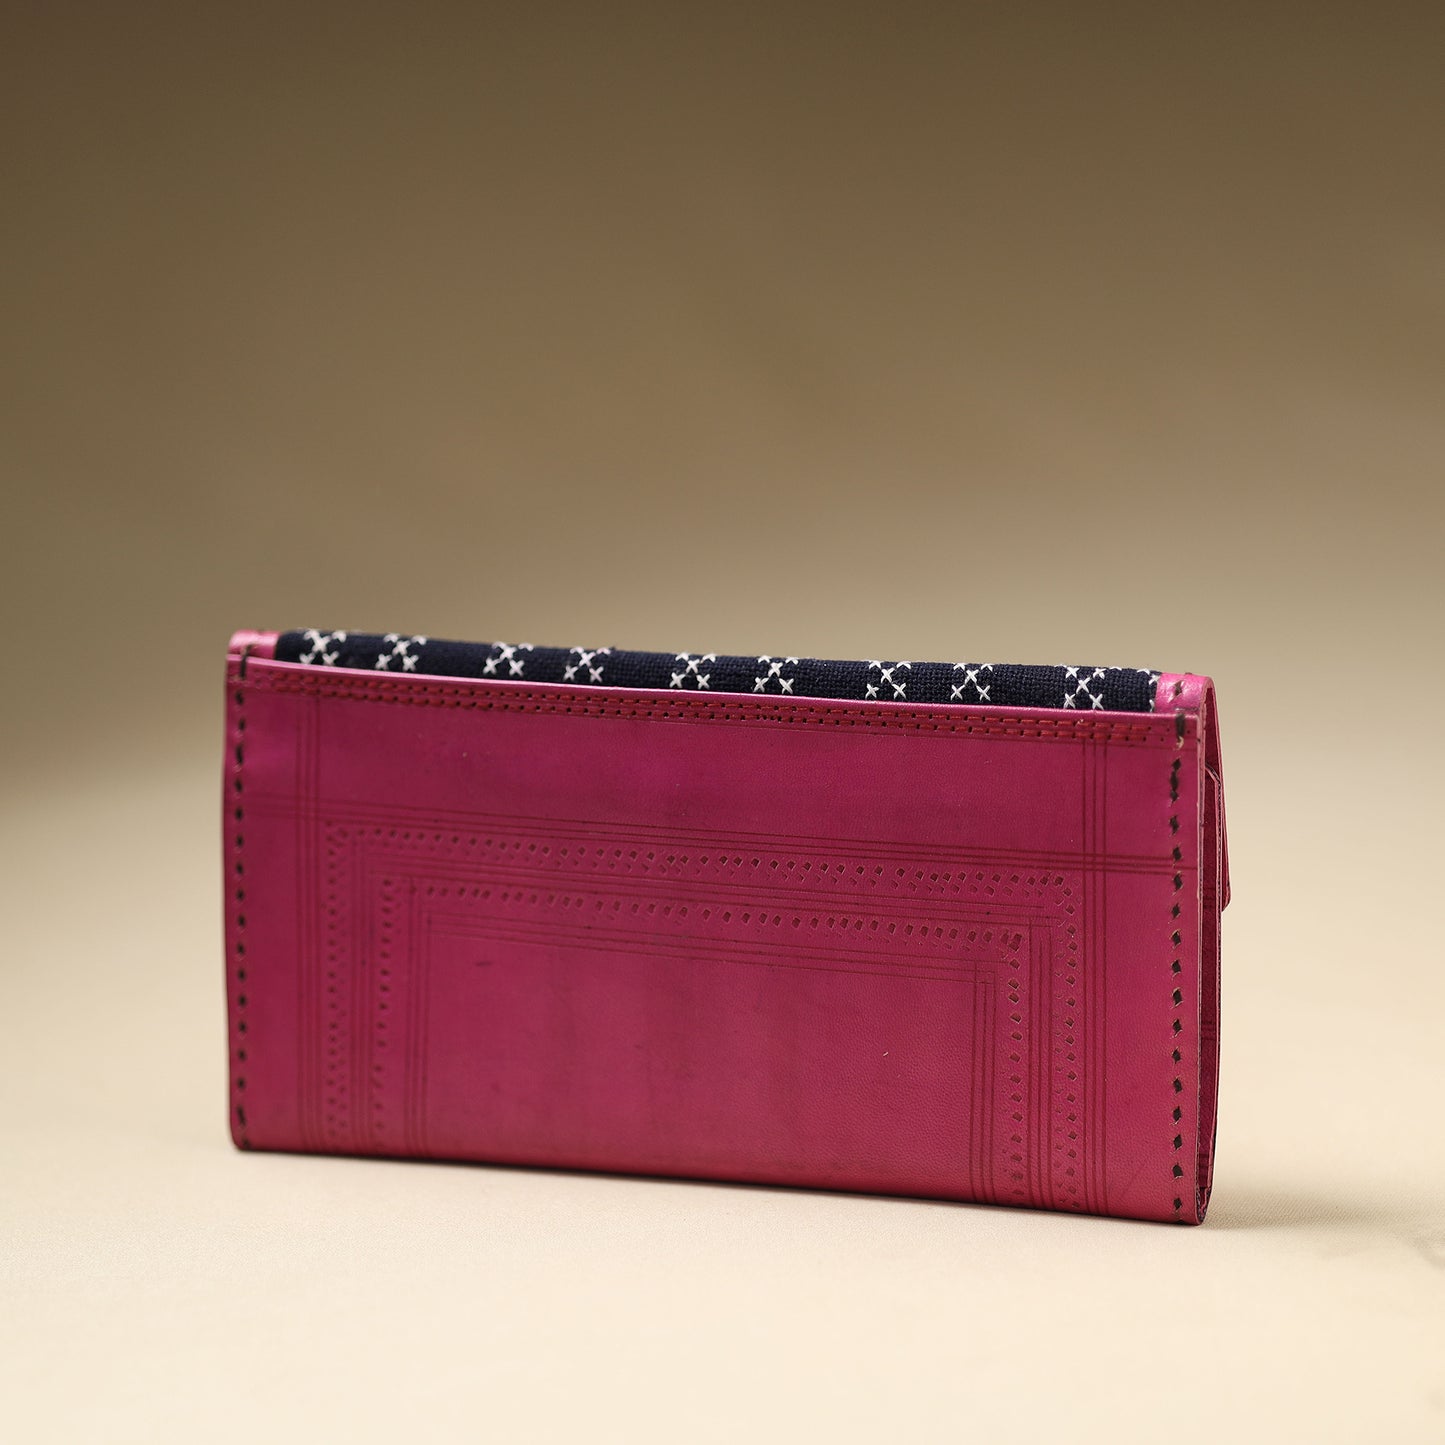 Handcrafted Kutch Jat Embroidery Cotton Leather Wallet